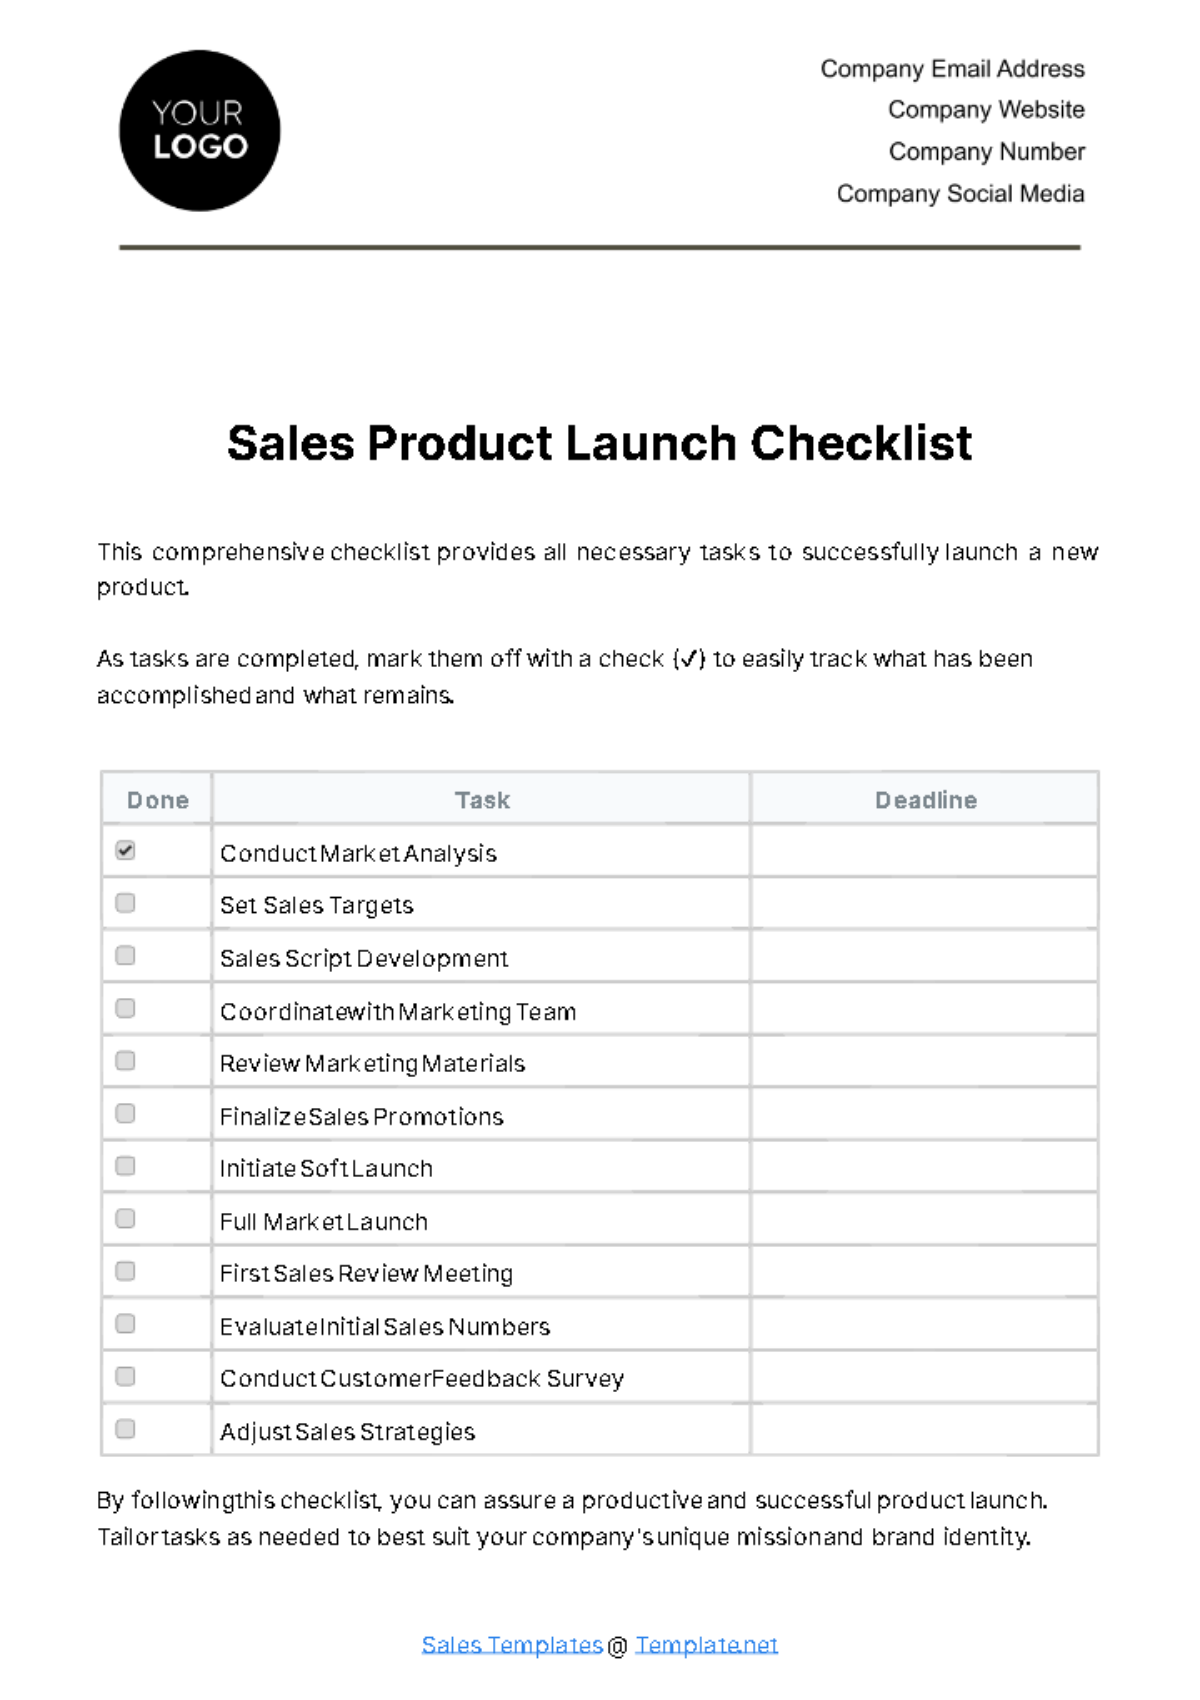 Free Sales Product Launch Checklist Template